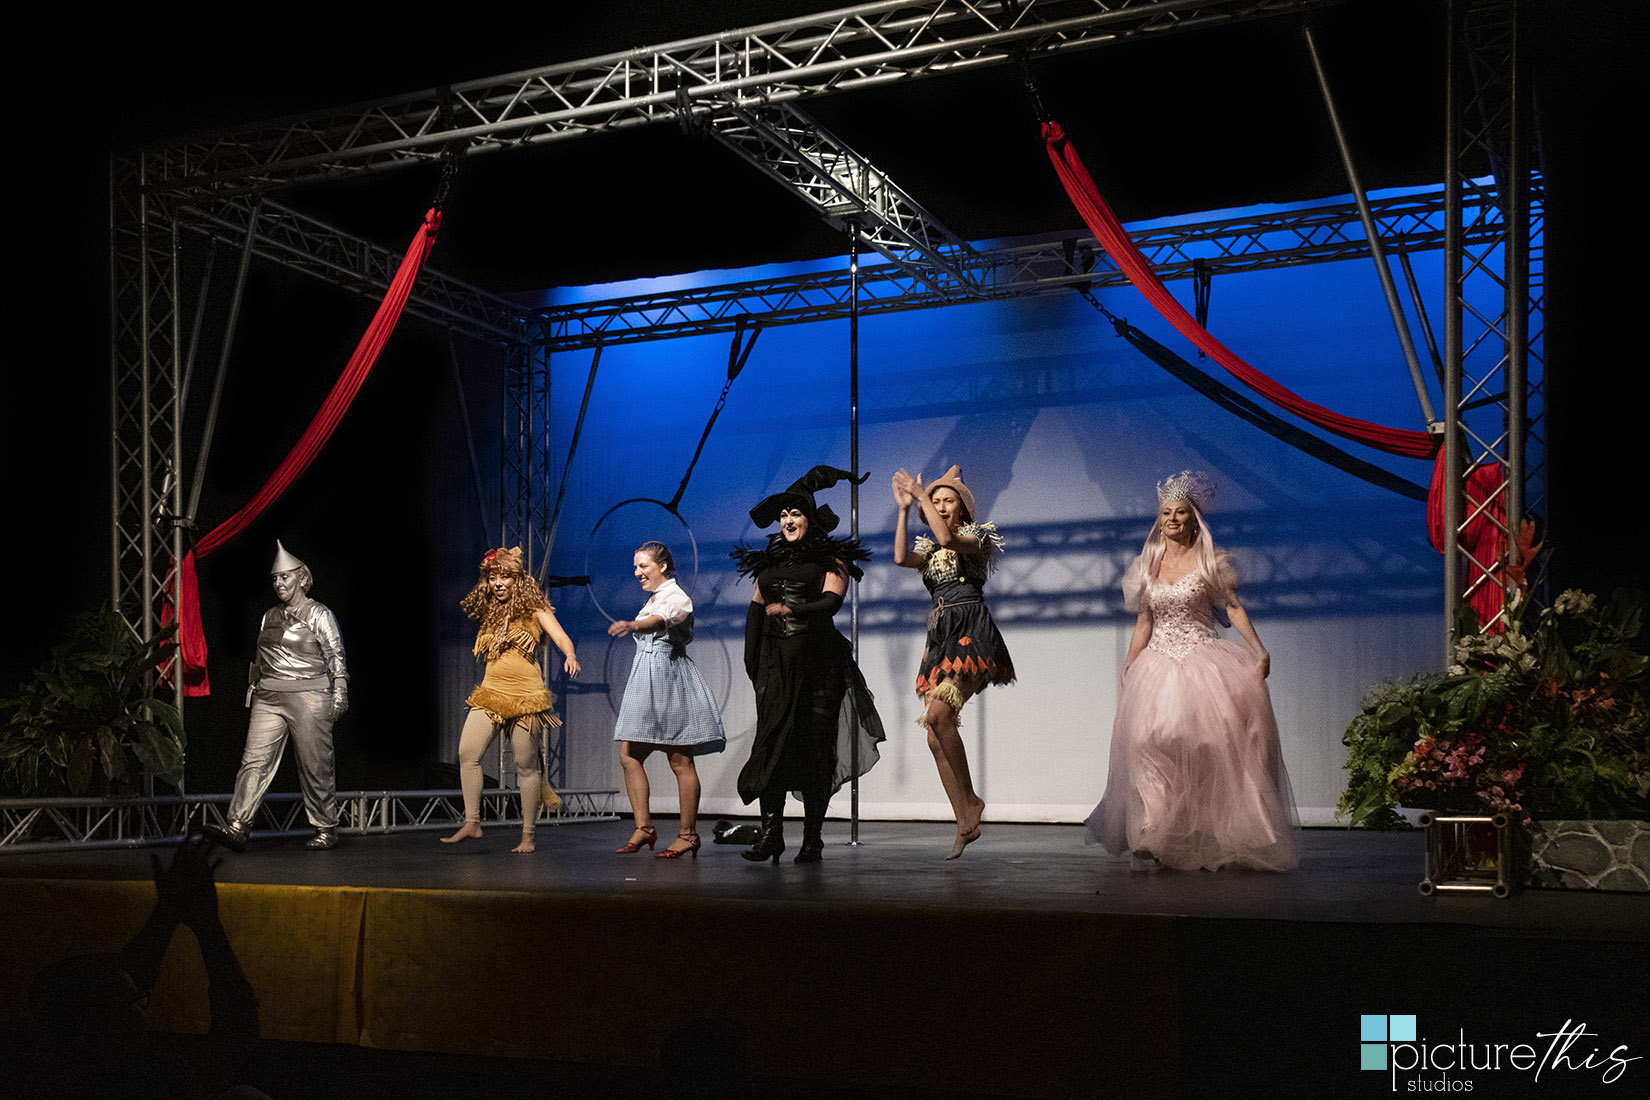 Picture This Studios and Heather Holt Photography captured the Quintessential Movement Performance of the Wizard of Oz at the Grand Cayman Harquail Theatre